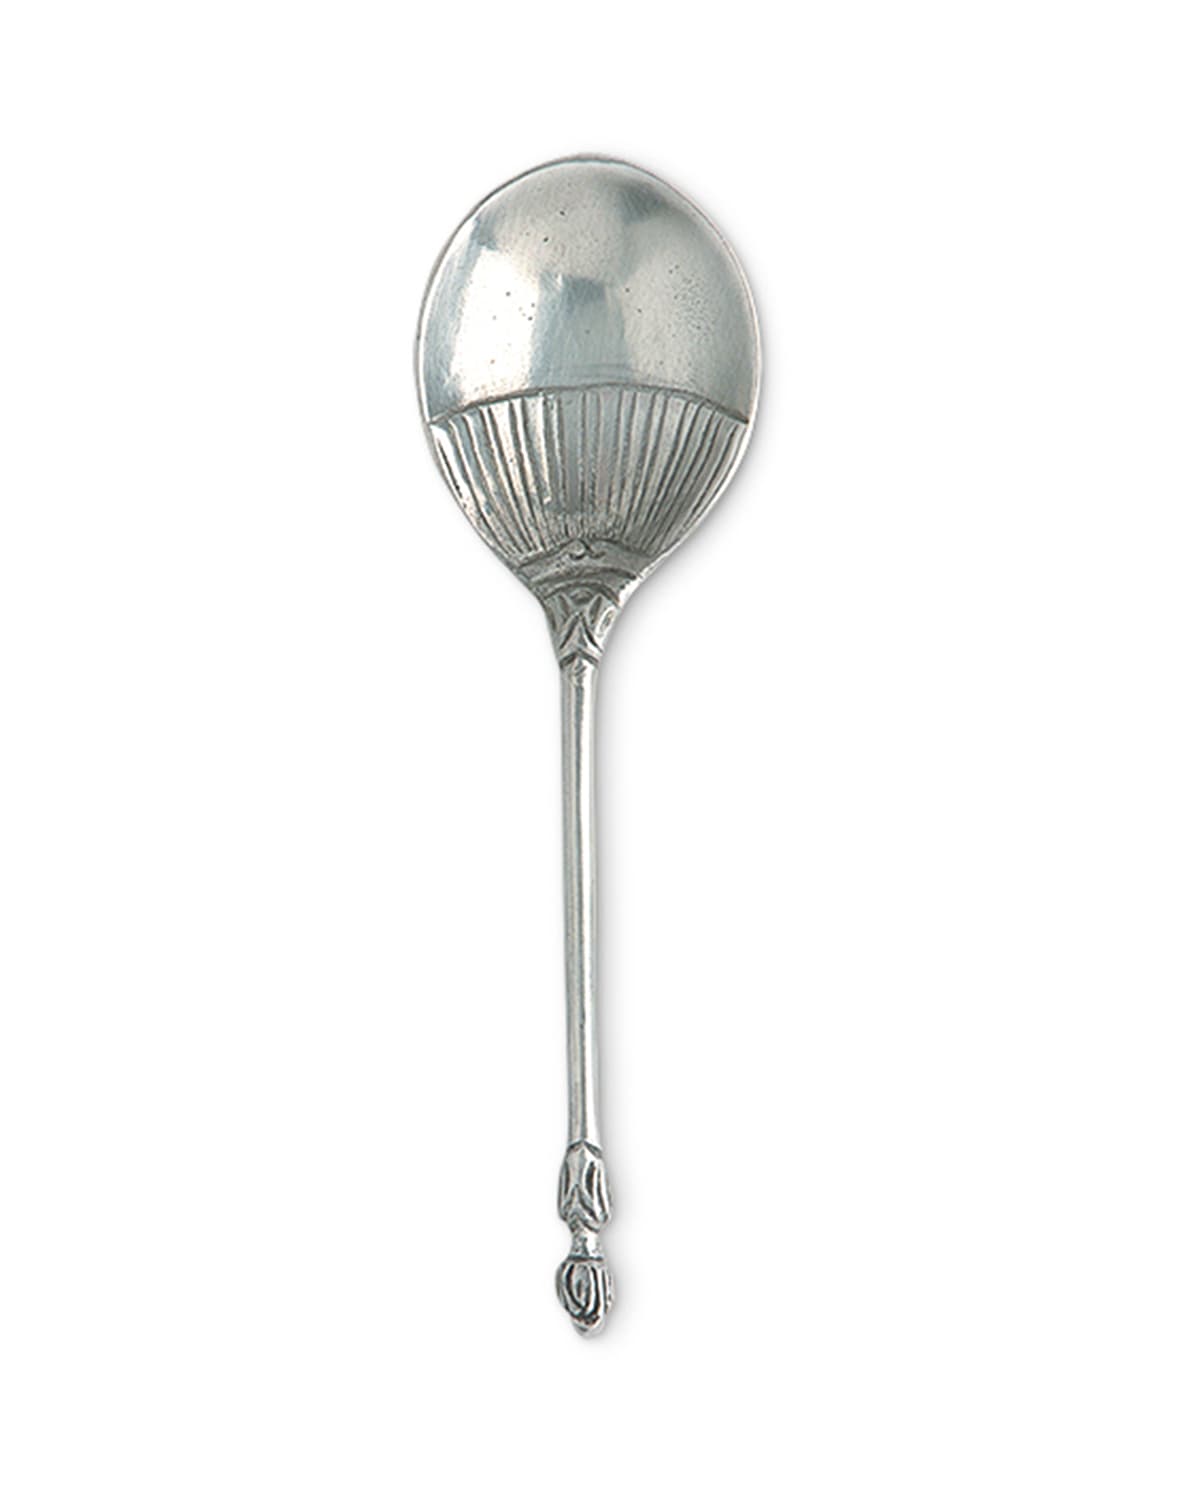 Match Engraved Spoon In Gray